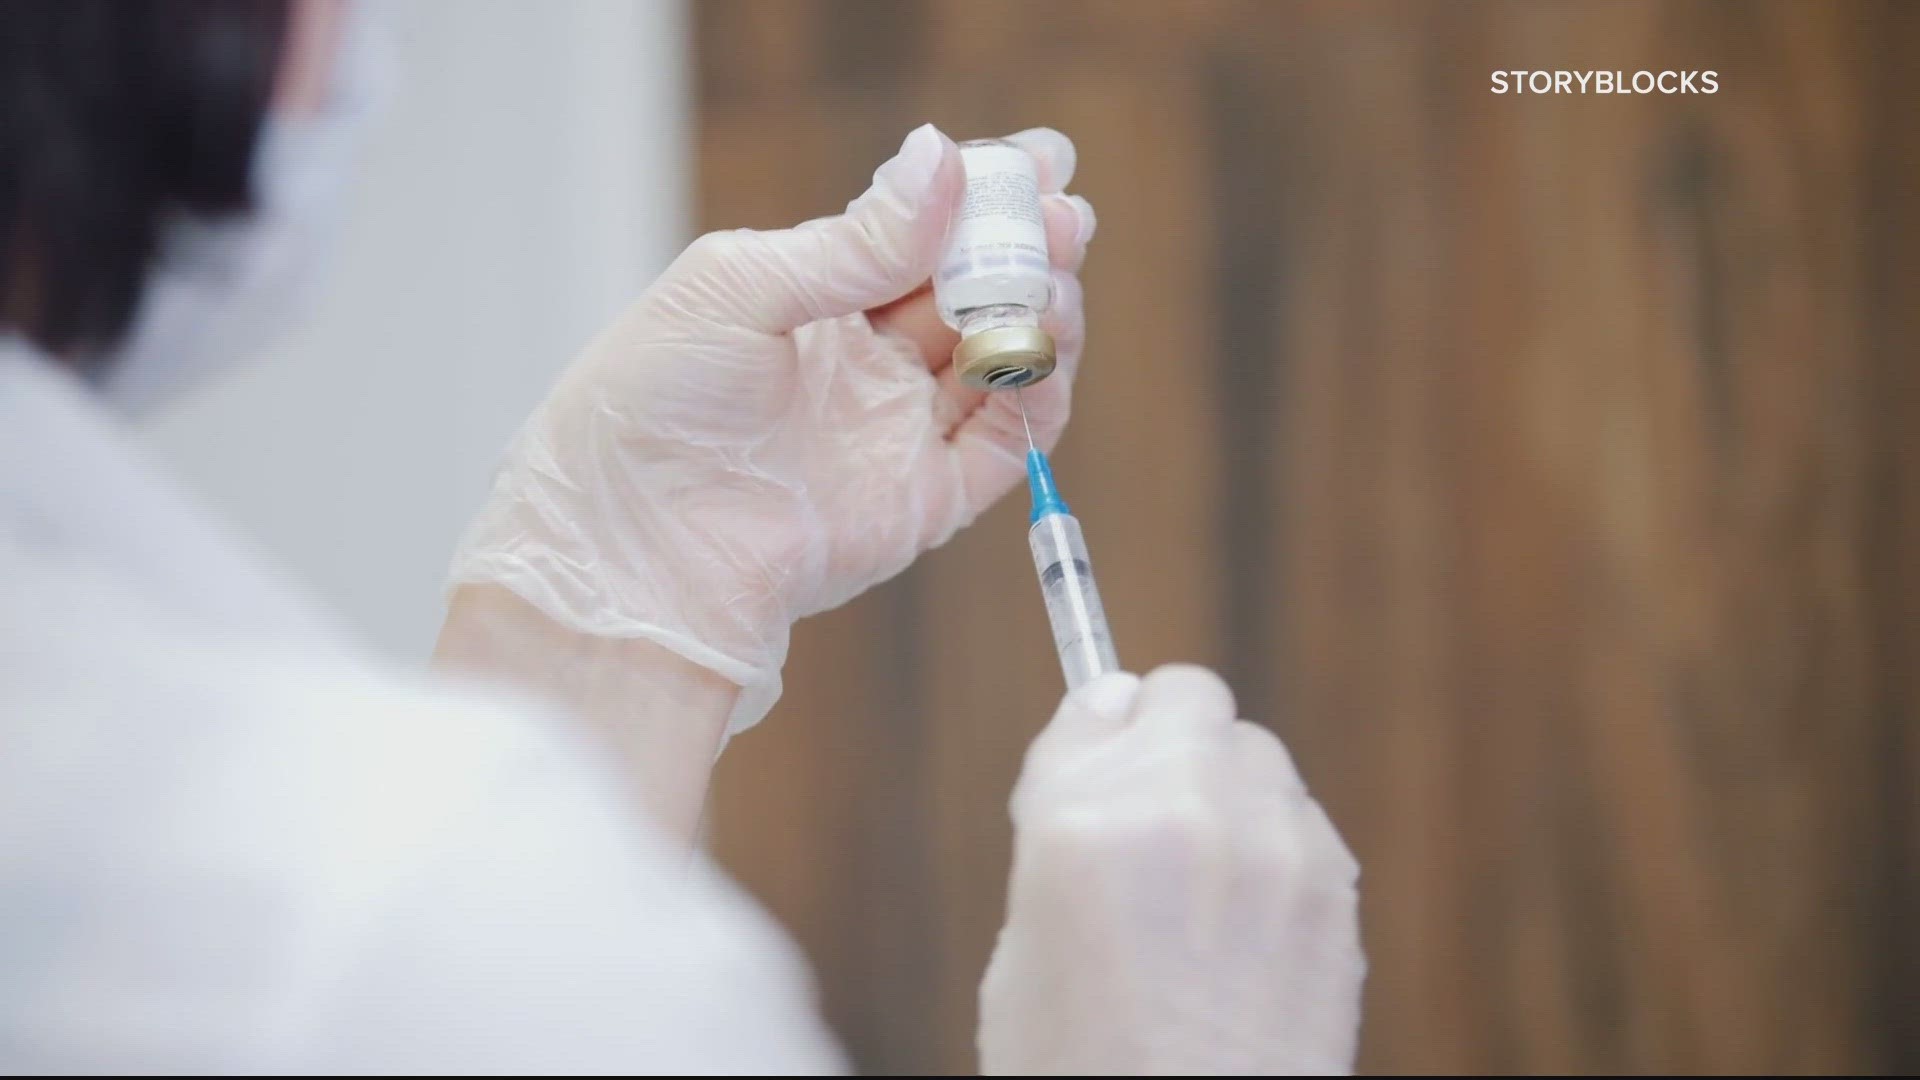 A viewer told us her pharmacy turned her down because Medicare would not cover her vaccine. System readiness for the new shots may be to blame.